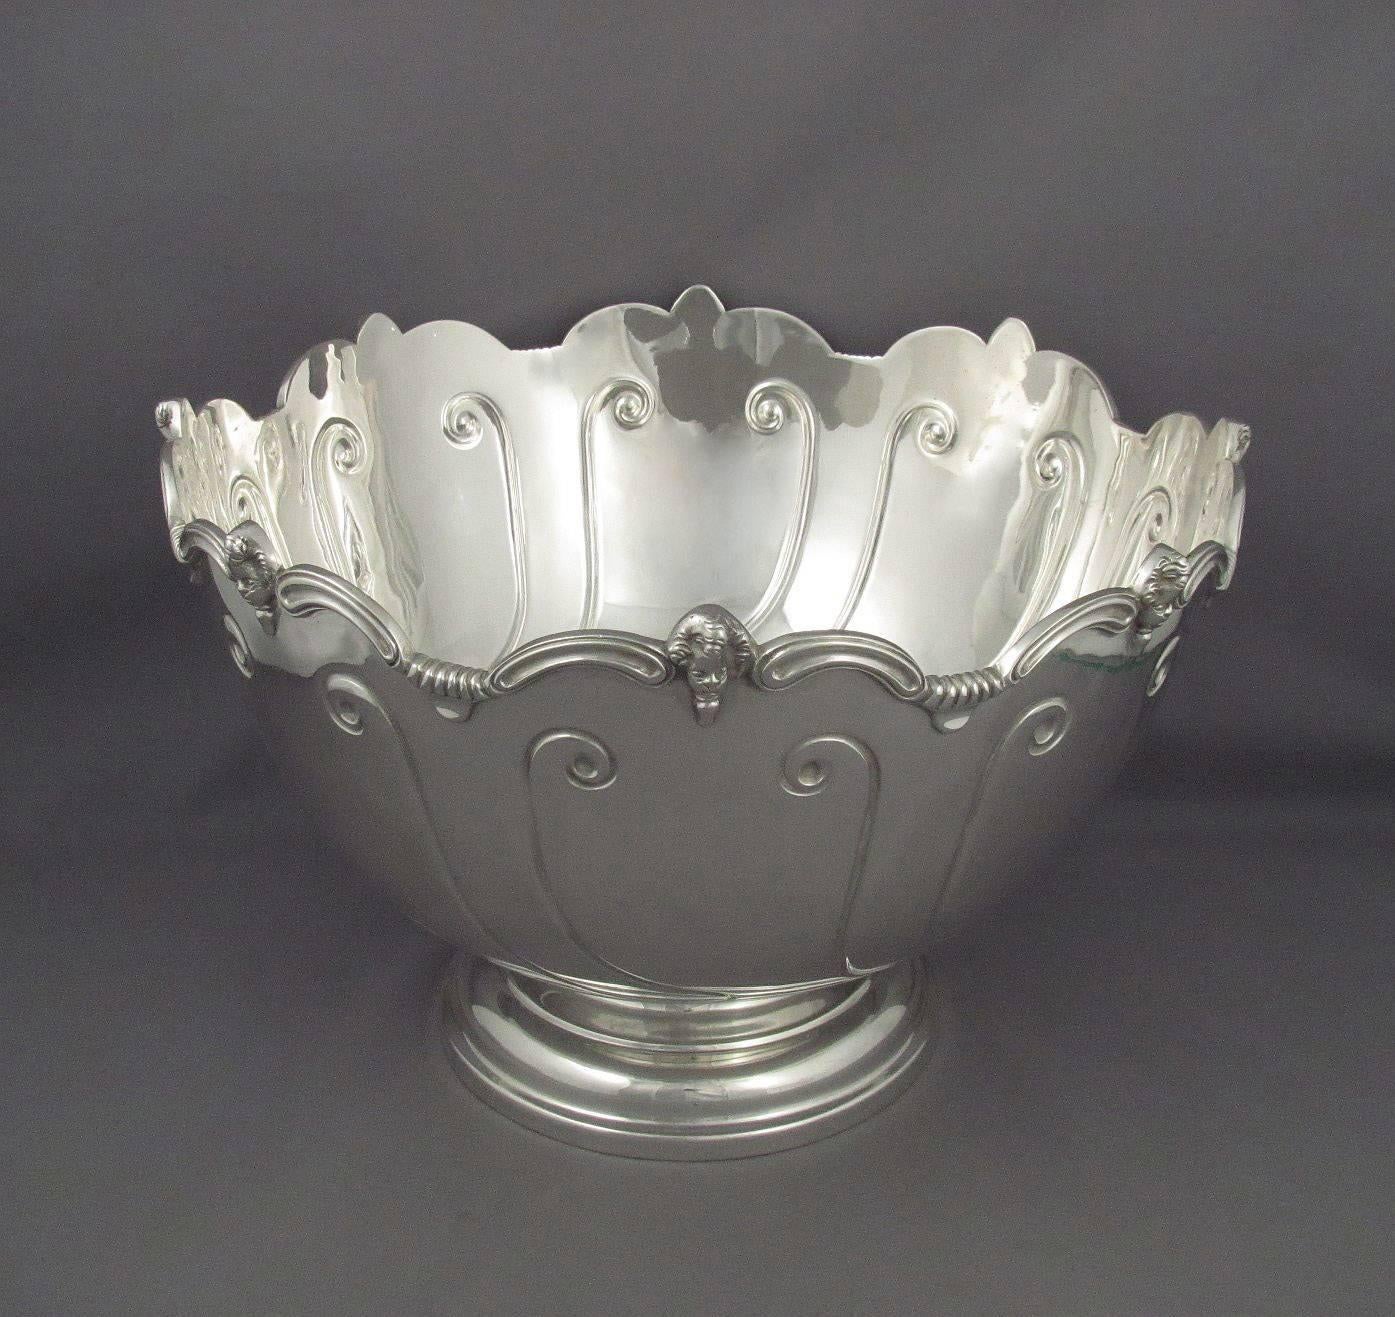 An antique silver Monteith style punch bowl by Thomas Bradbury & Sons, hallmarked Sheffield 1910. Scroll edged rim with cherub masks, the body embossed with scroll, on pedestal foot. Measures: 12.25" (31.1cm) diameter, 8.25" (21cm)